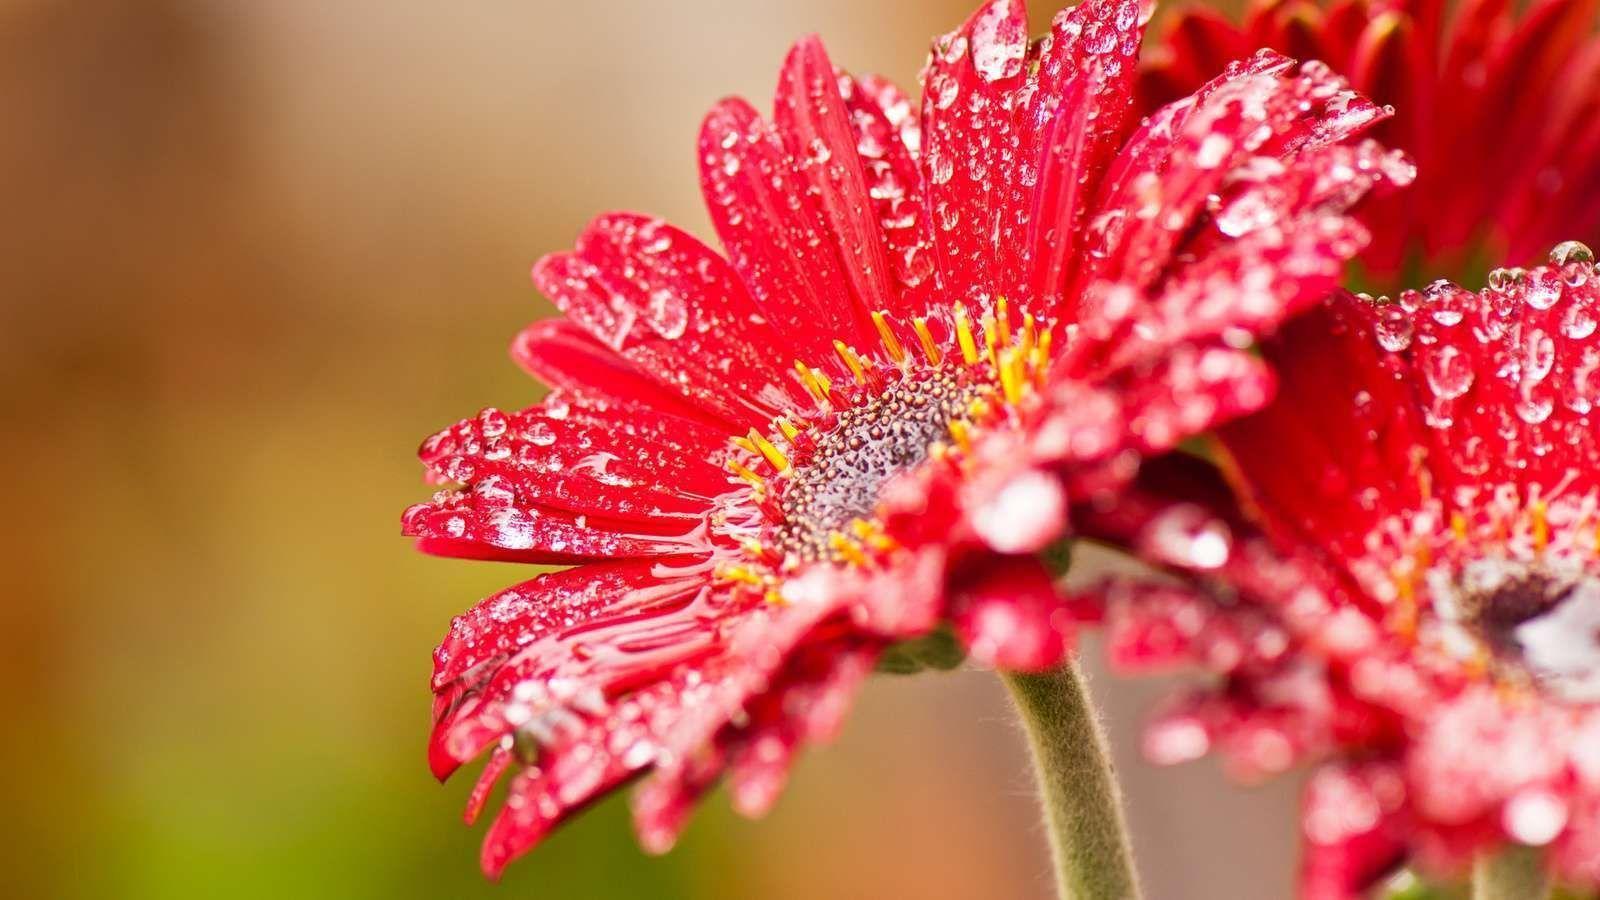 Different Flower Wallpapers - Top Free Different Flower ...